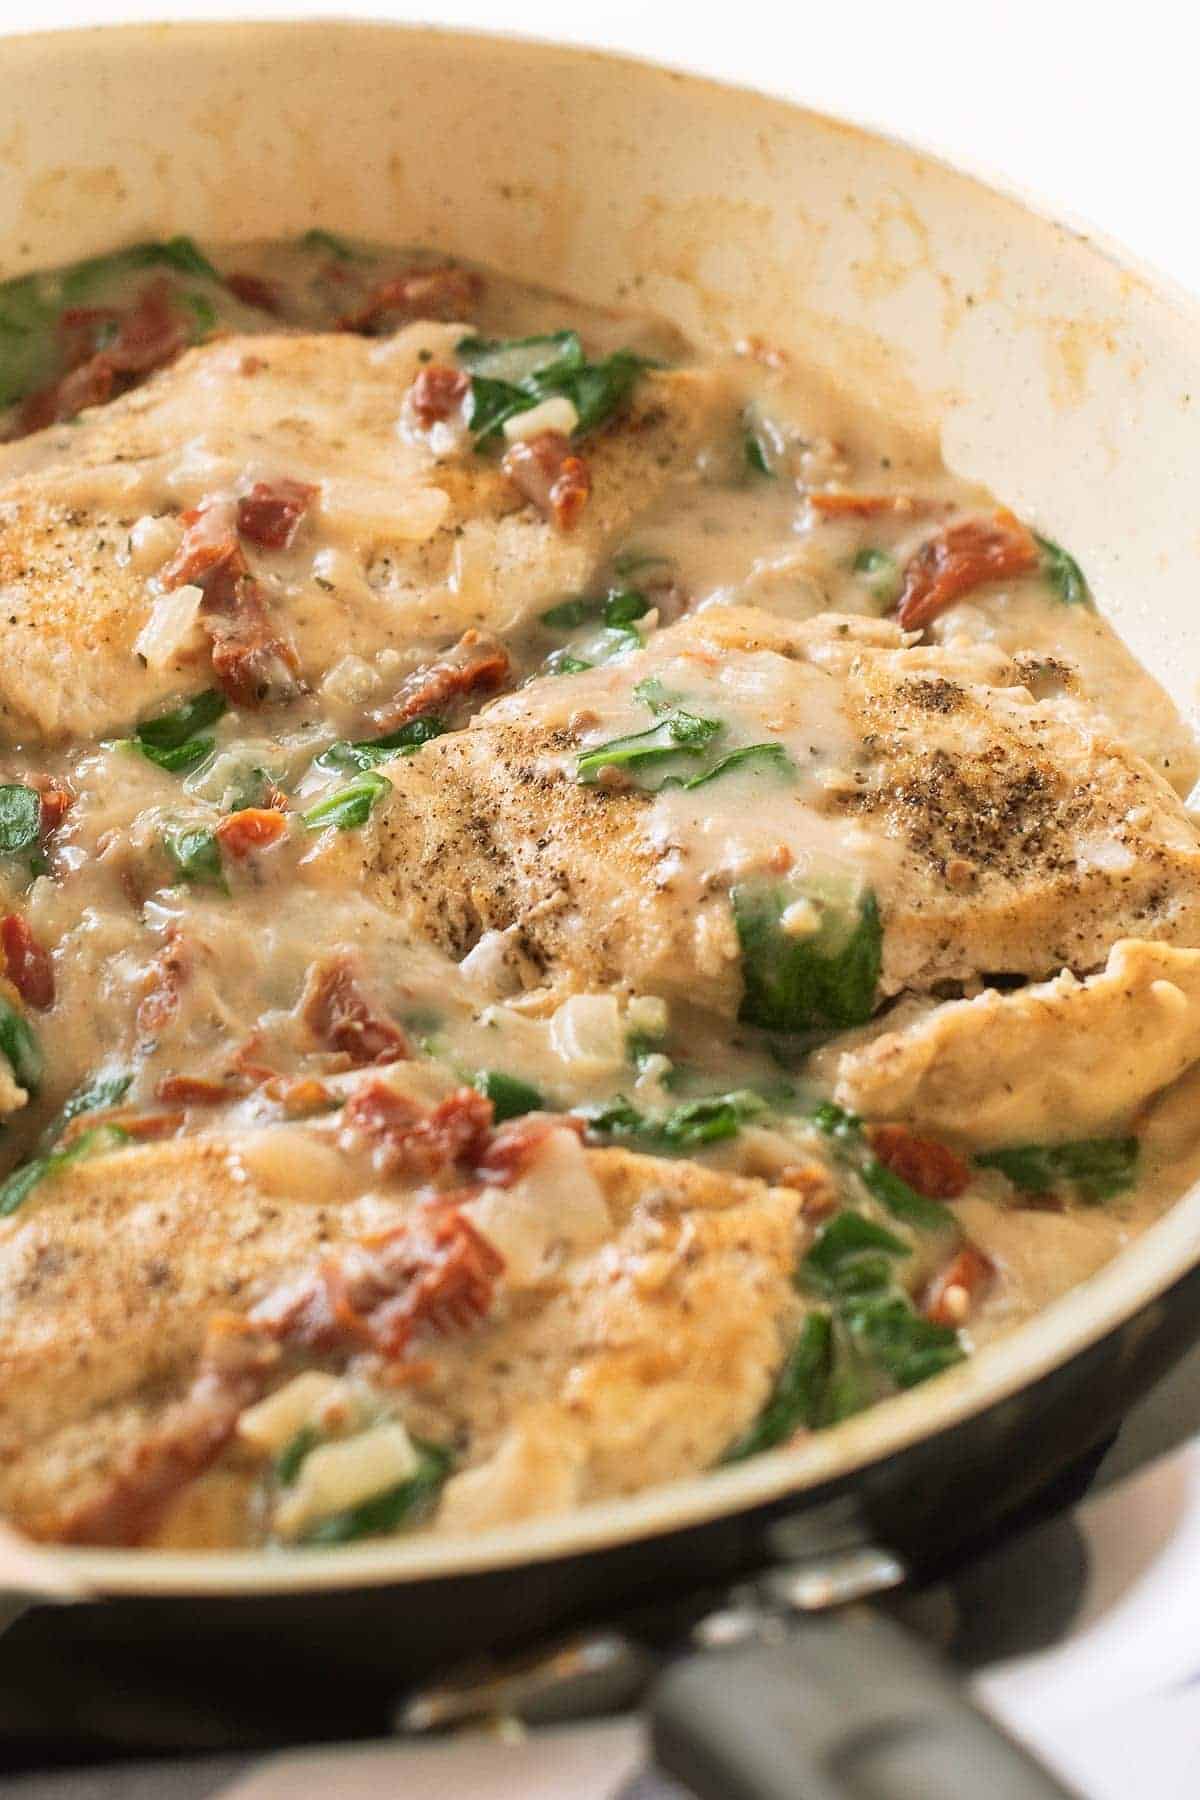 Keto Tuscan Chicken Recipe with Coconut Milk. Spinach, seasoned chicken and sun-dried tomatoes in a pan.